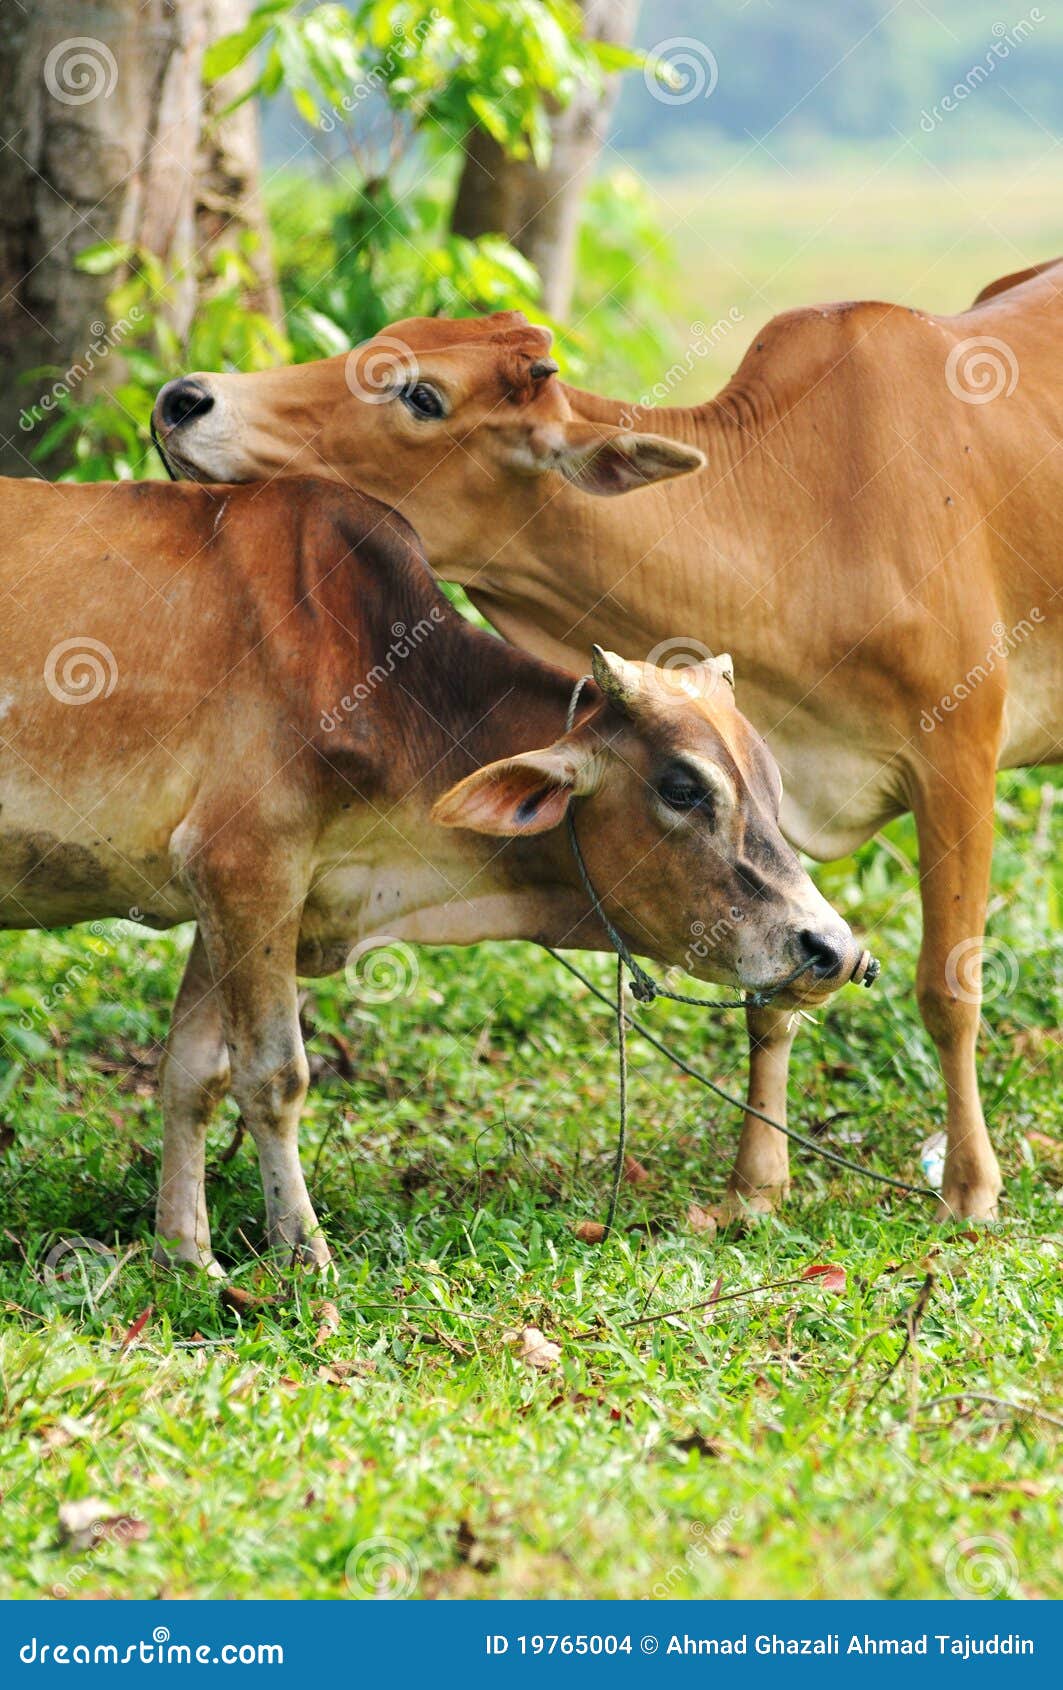 intimate cow with love